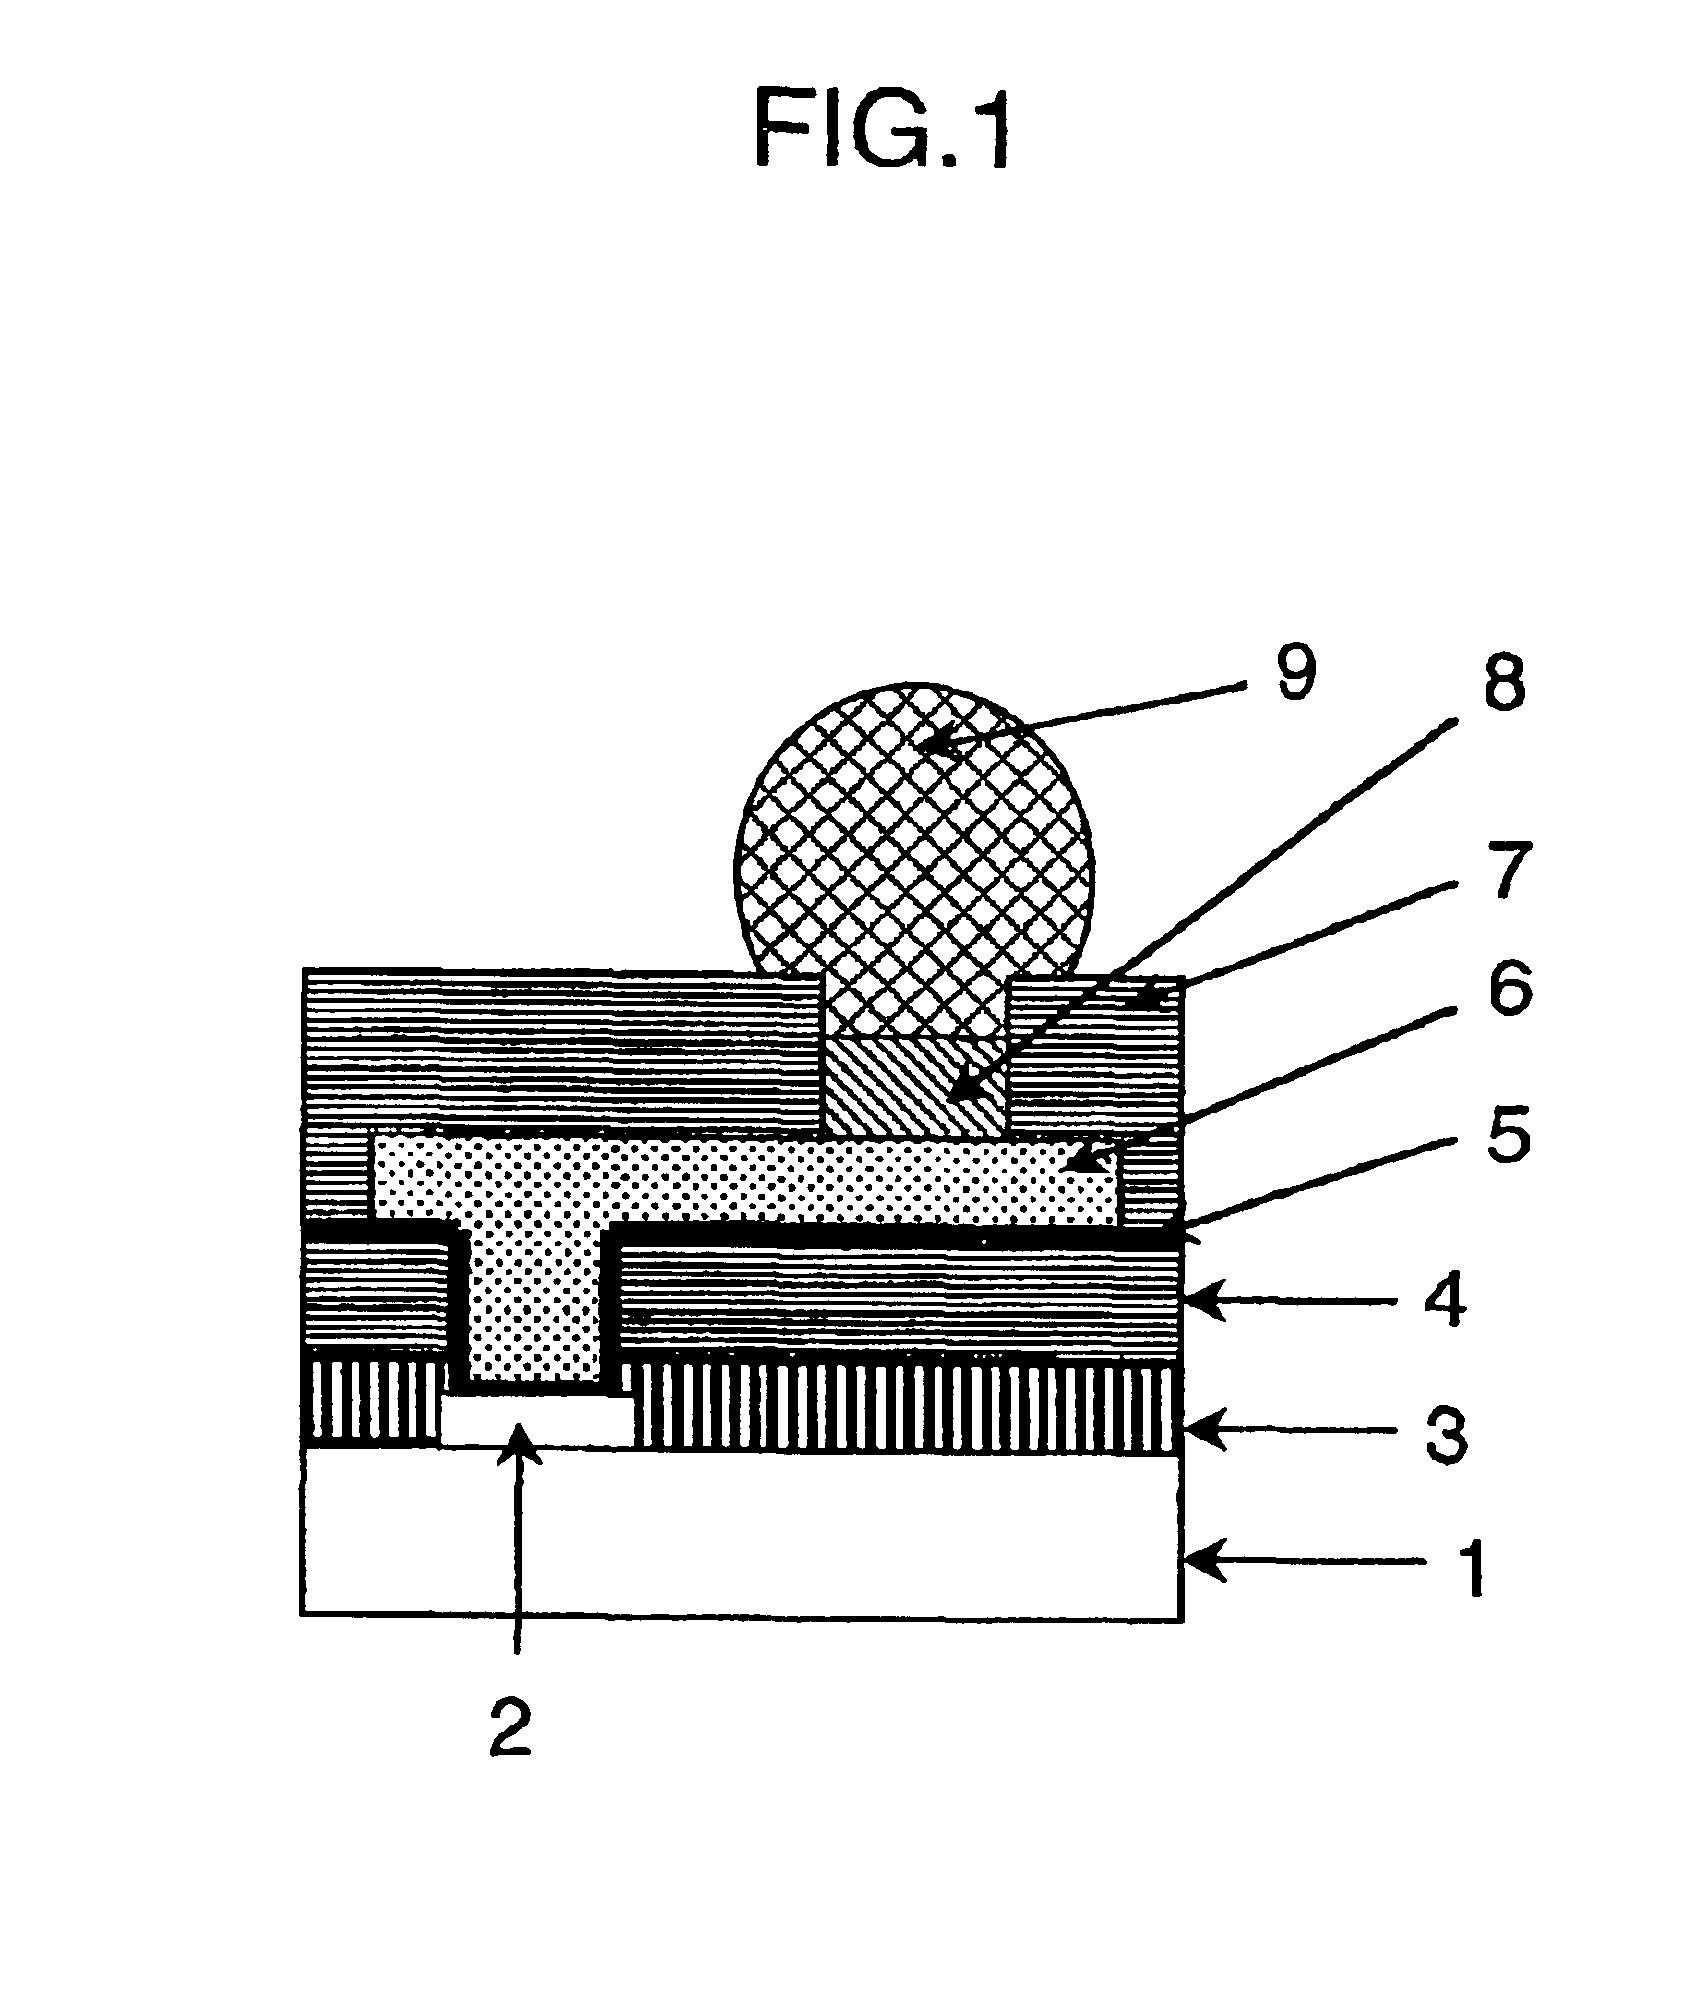 Positive photosensitive resin composition, process for its preparation, and semiconductor devices